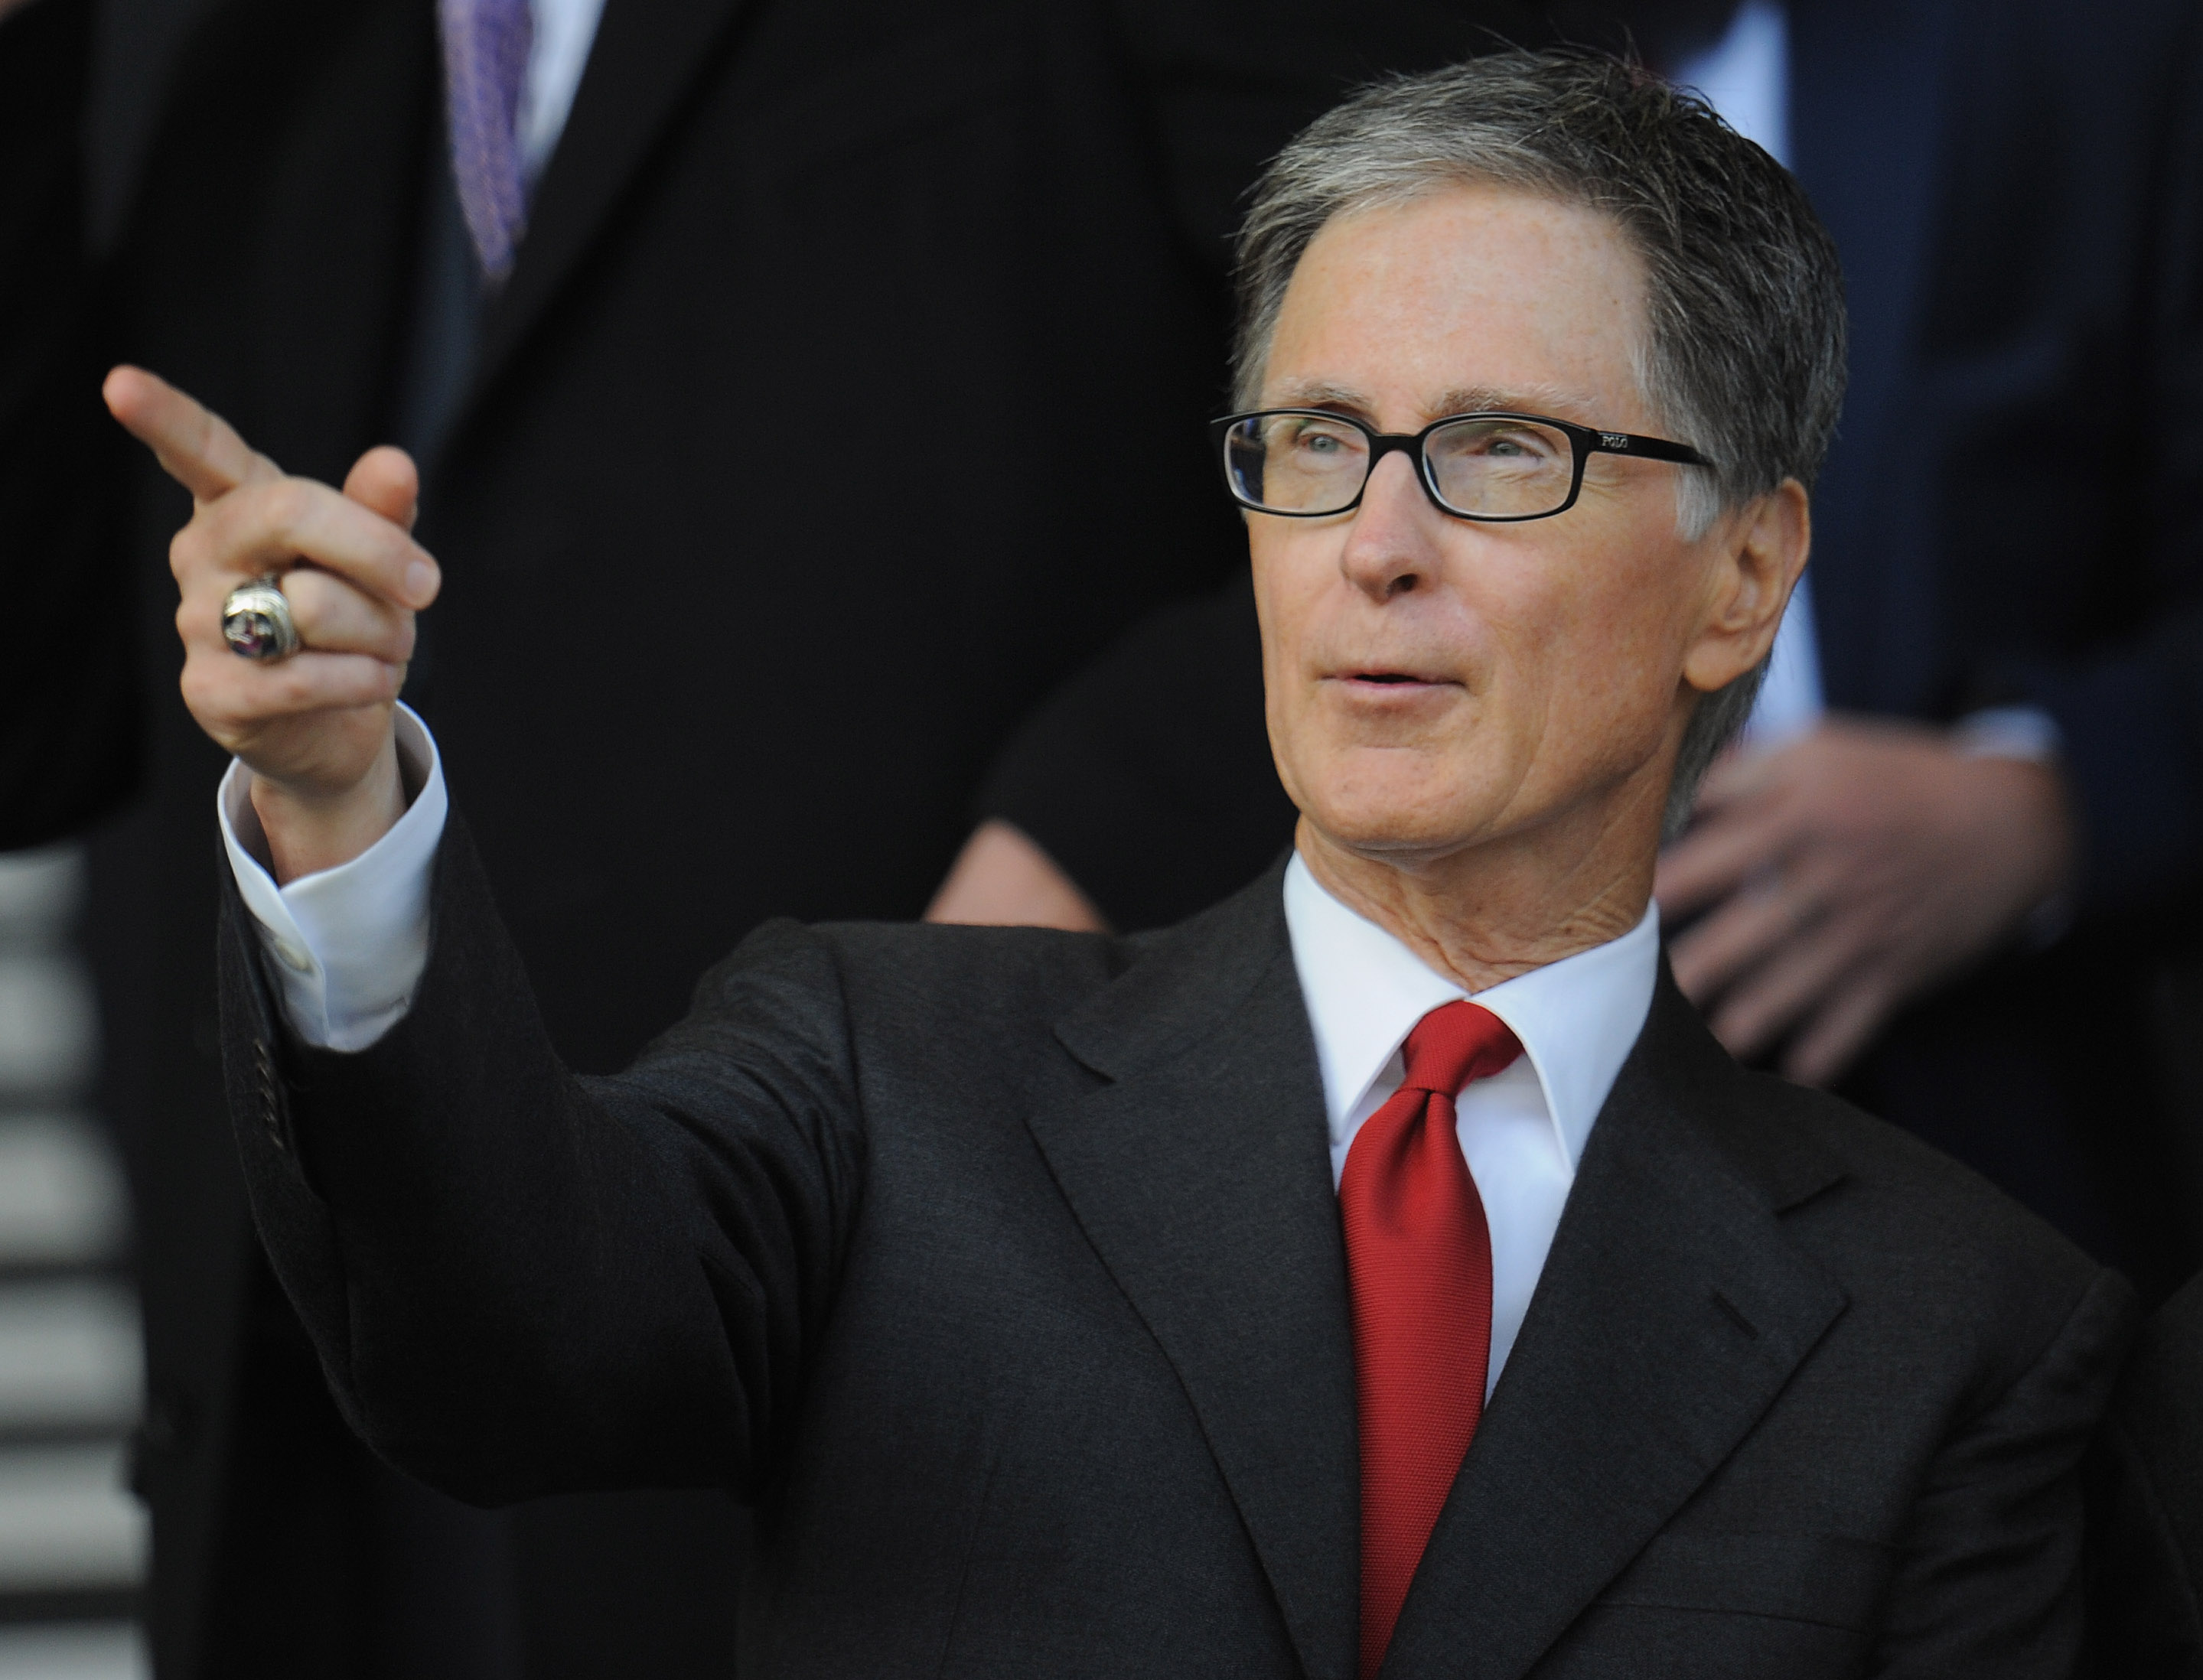 LIVERPOOL, ENGLAND - OCTOBER 17:  Liverpool owner John W Henry looks on during the Barclays Premier League match between Everton and Liverpool at Goodison Park on October 17, 2010 in Liverpool, England.  (Photo by Michael Regan/Getty Images)